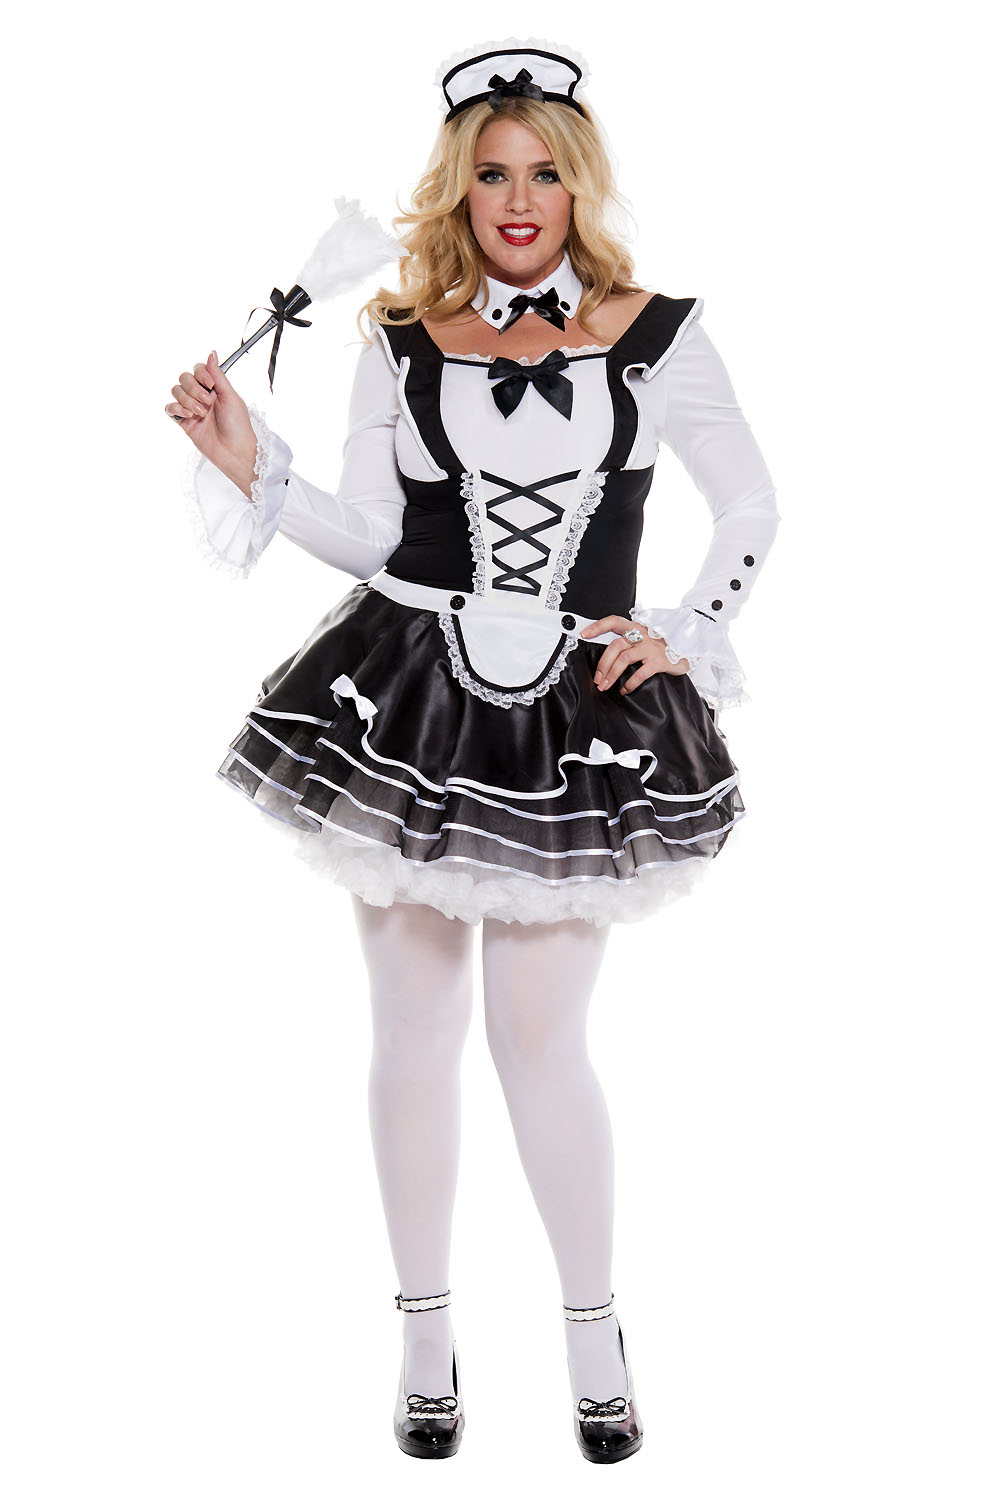 Adult Proper French Maid Plus Size Woman Costume 6099 The Costume Land